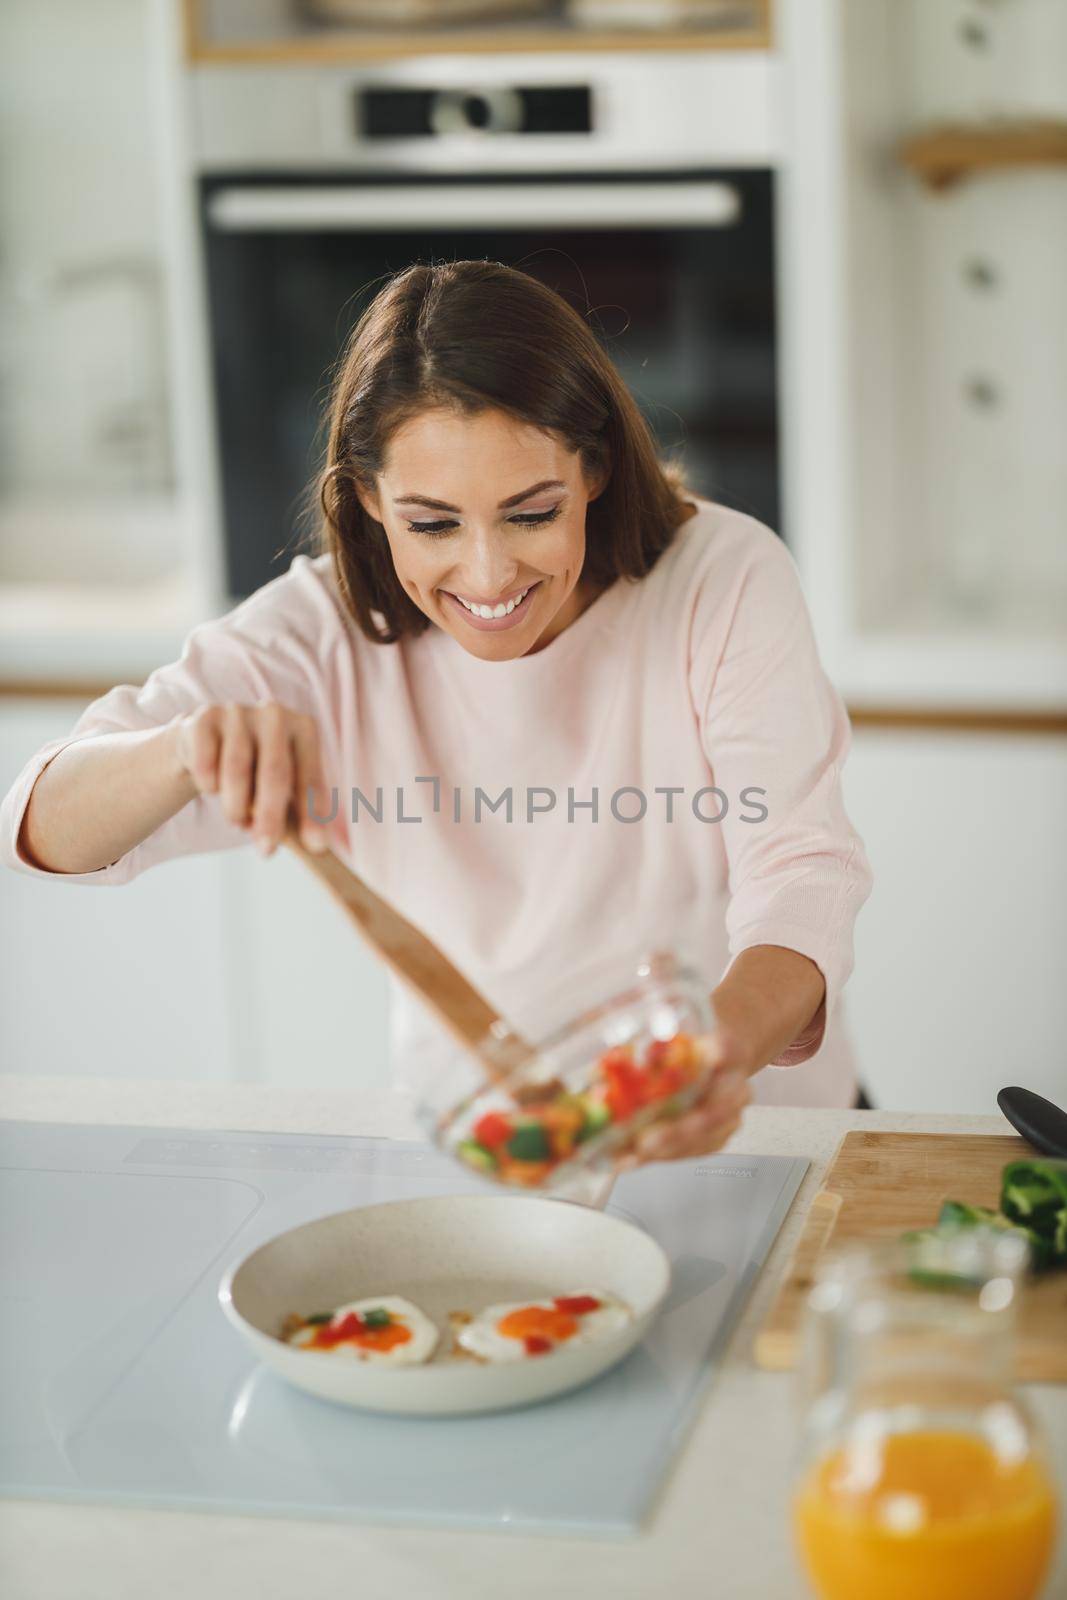 Shot of a young woman preparing a healthy meal on the stove in her kitchen.